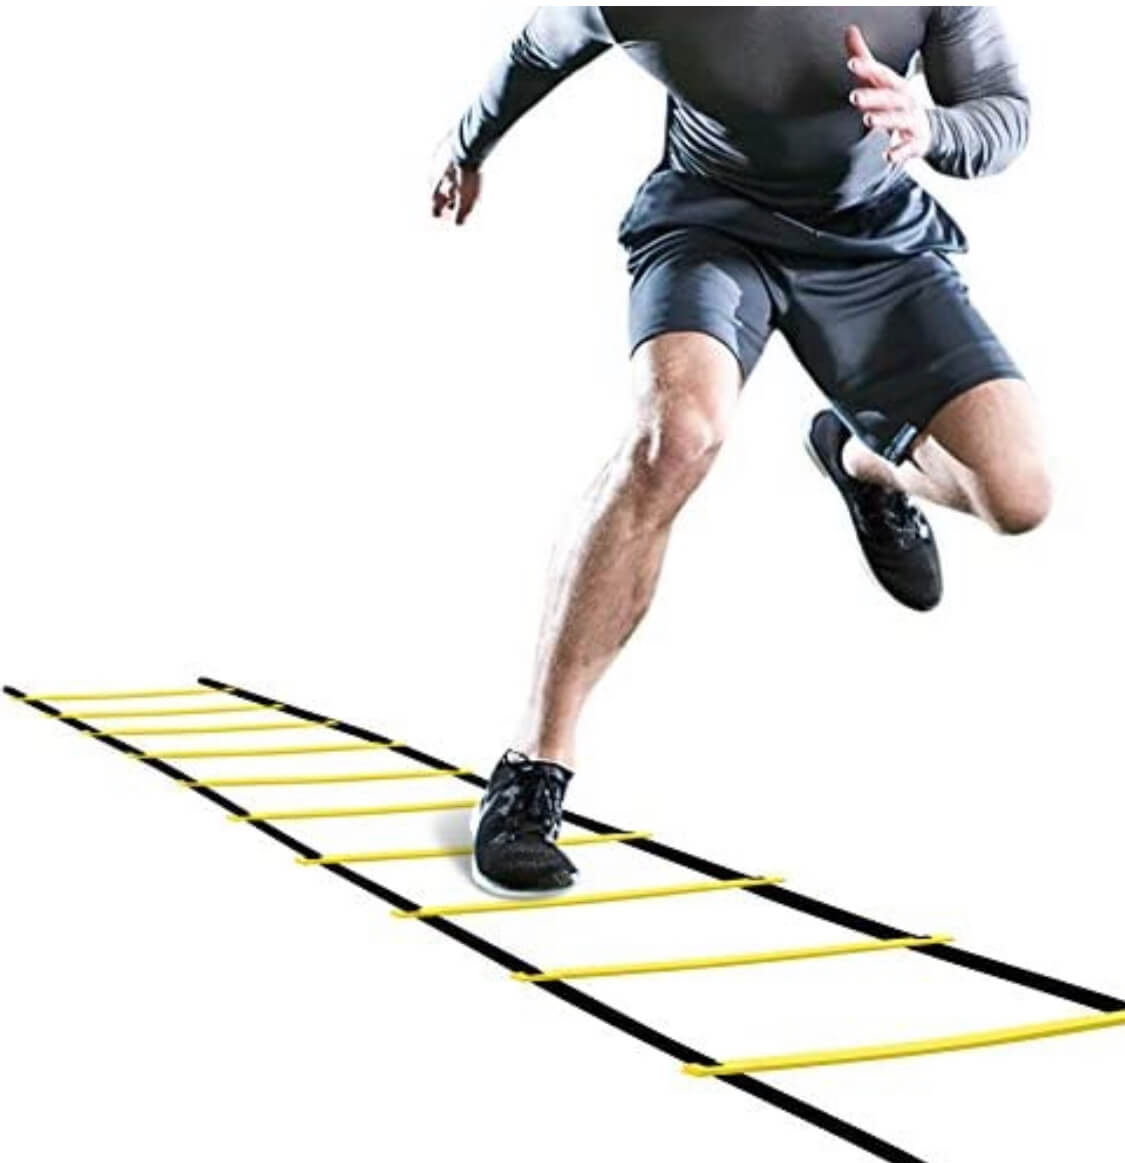 Agility ladder for travel